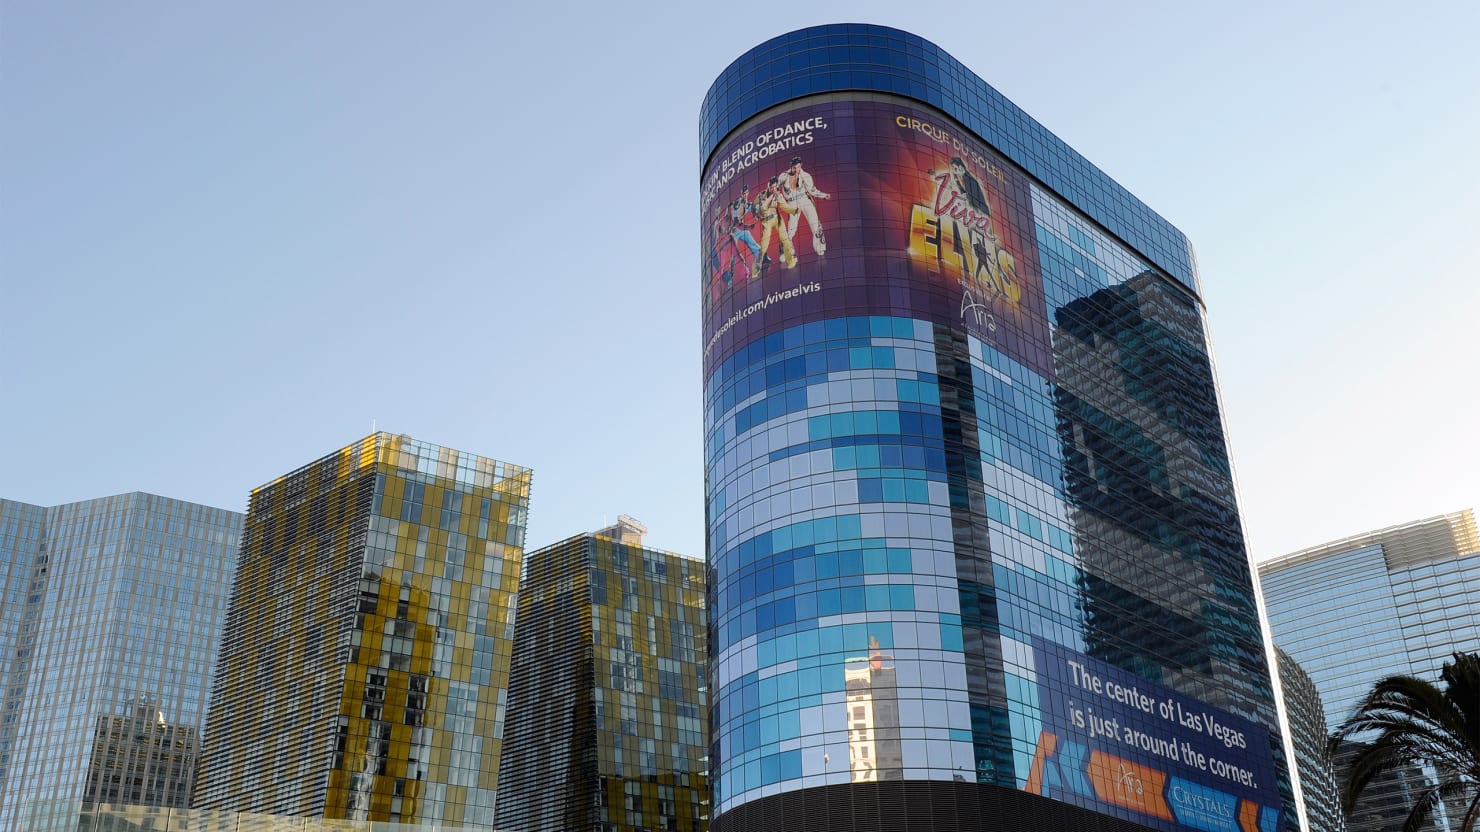 Foster's Las Vegas tower 'cut in half' after construction blunder